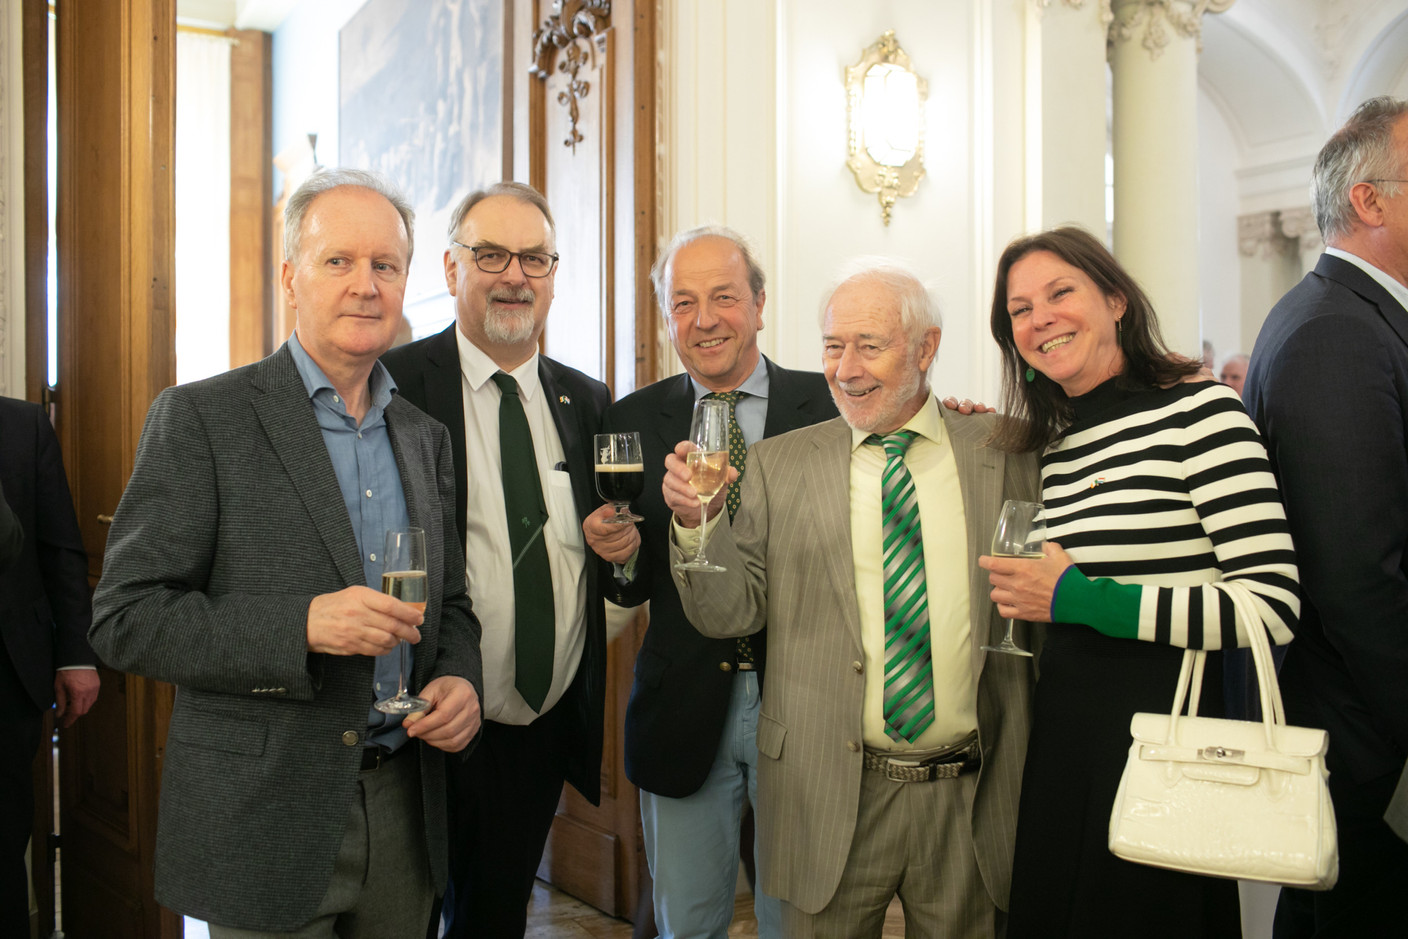 Guests at the Irish embassy’s St Patrick’s Day reception, including Geoff Thompson (second from l.)  Photo: Matic Zorman / Maison Moderne